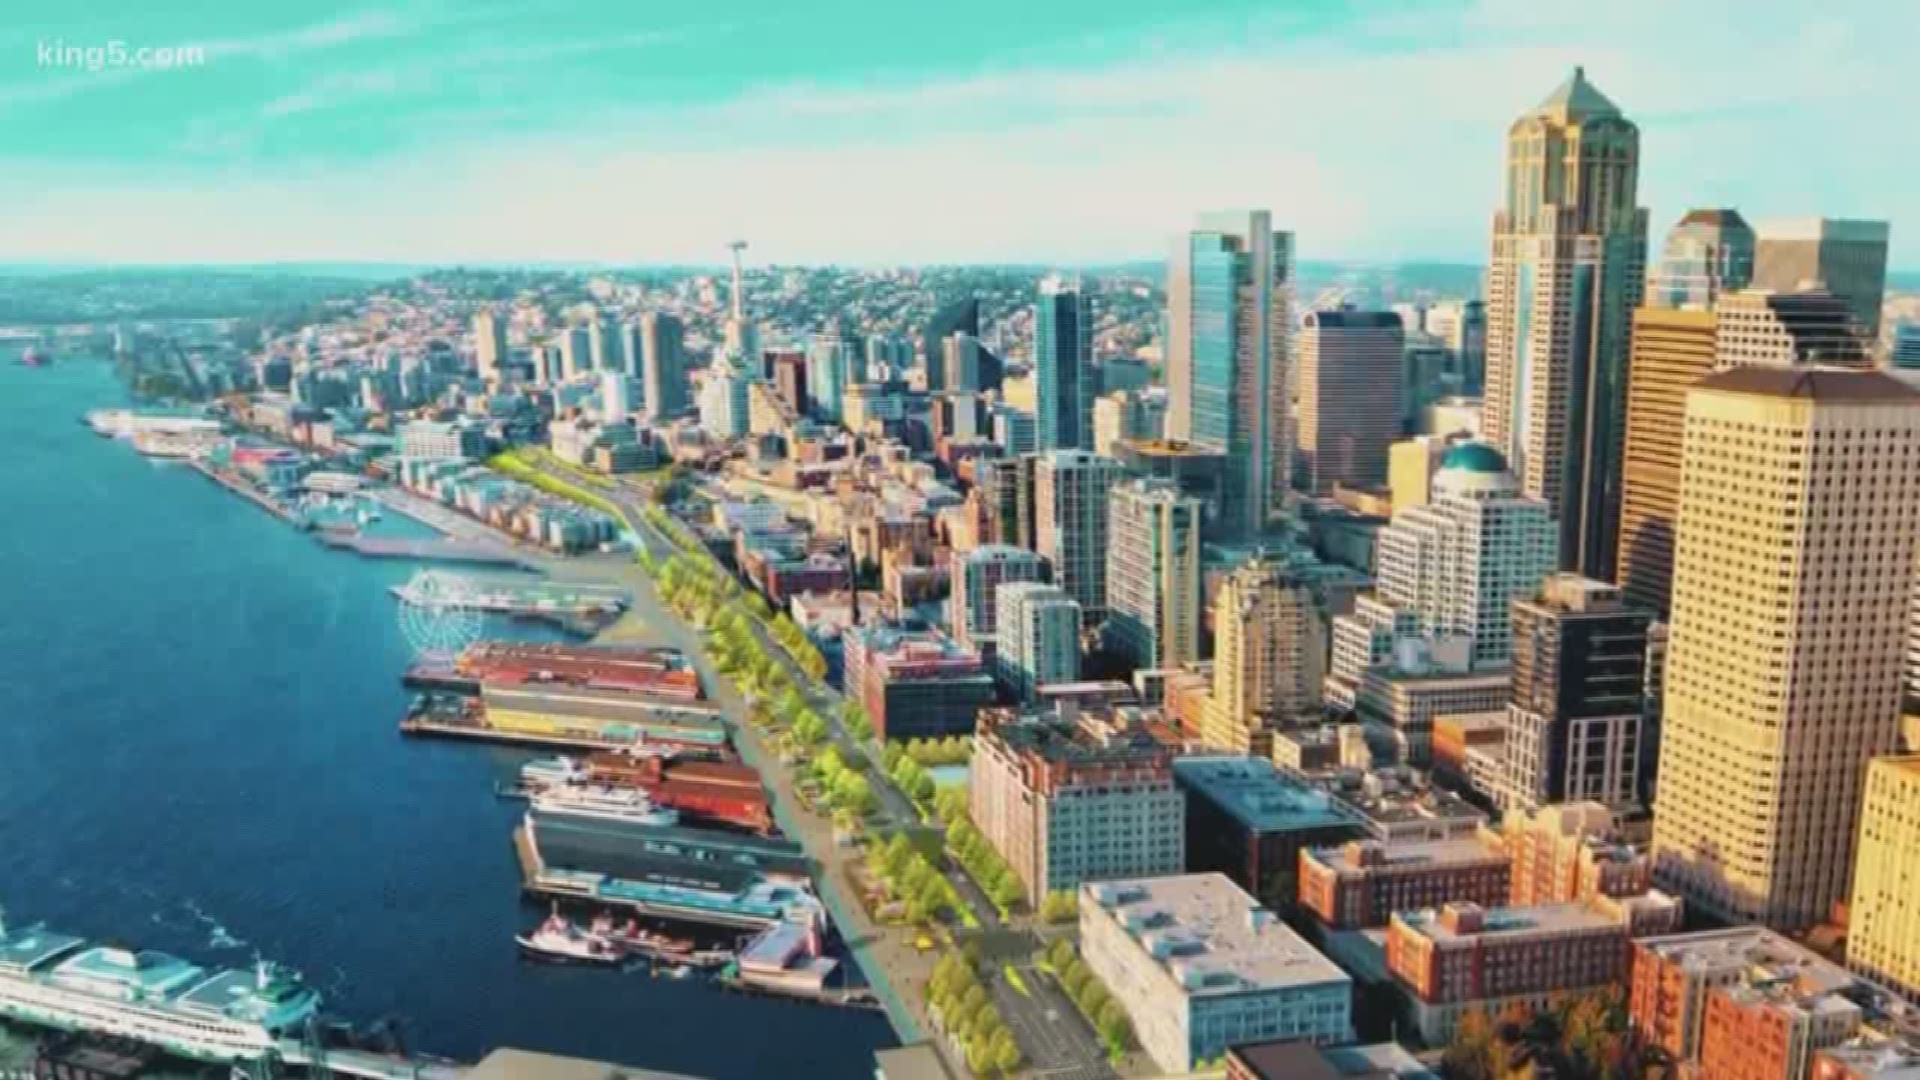 Get a sneak peak of the new Seattle waterfront.